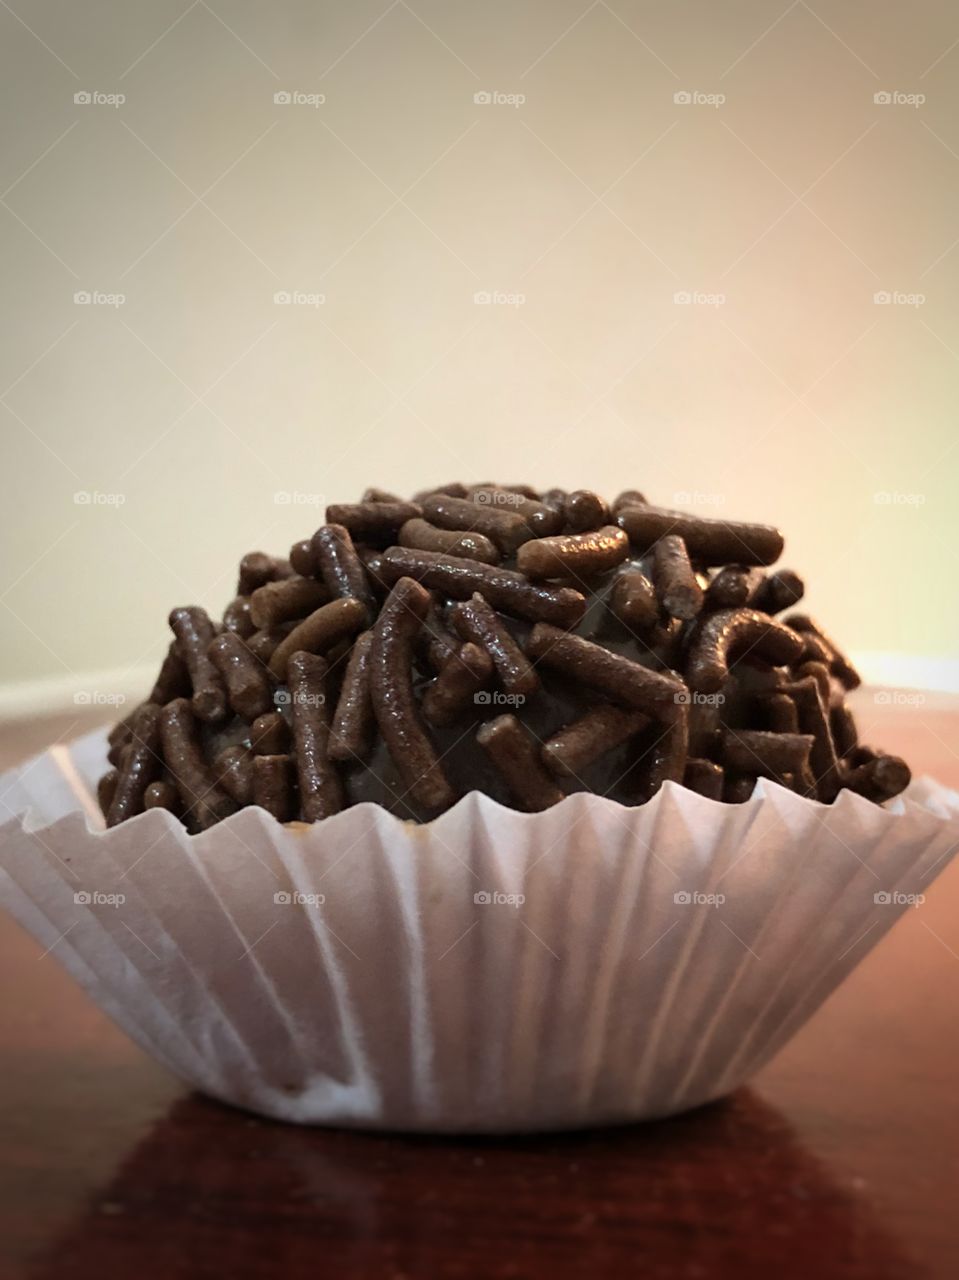 A favorite sweet of mine: it is called Brigadeiro. It is a Brazilian sweet made of chocolate and condensed milk. It is a kind of chocolate truffle with chocolate sprinkles. For anyone with a sweet tooth, like me!